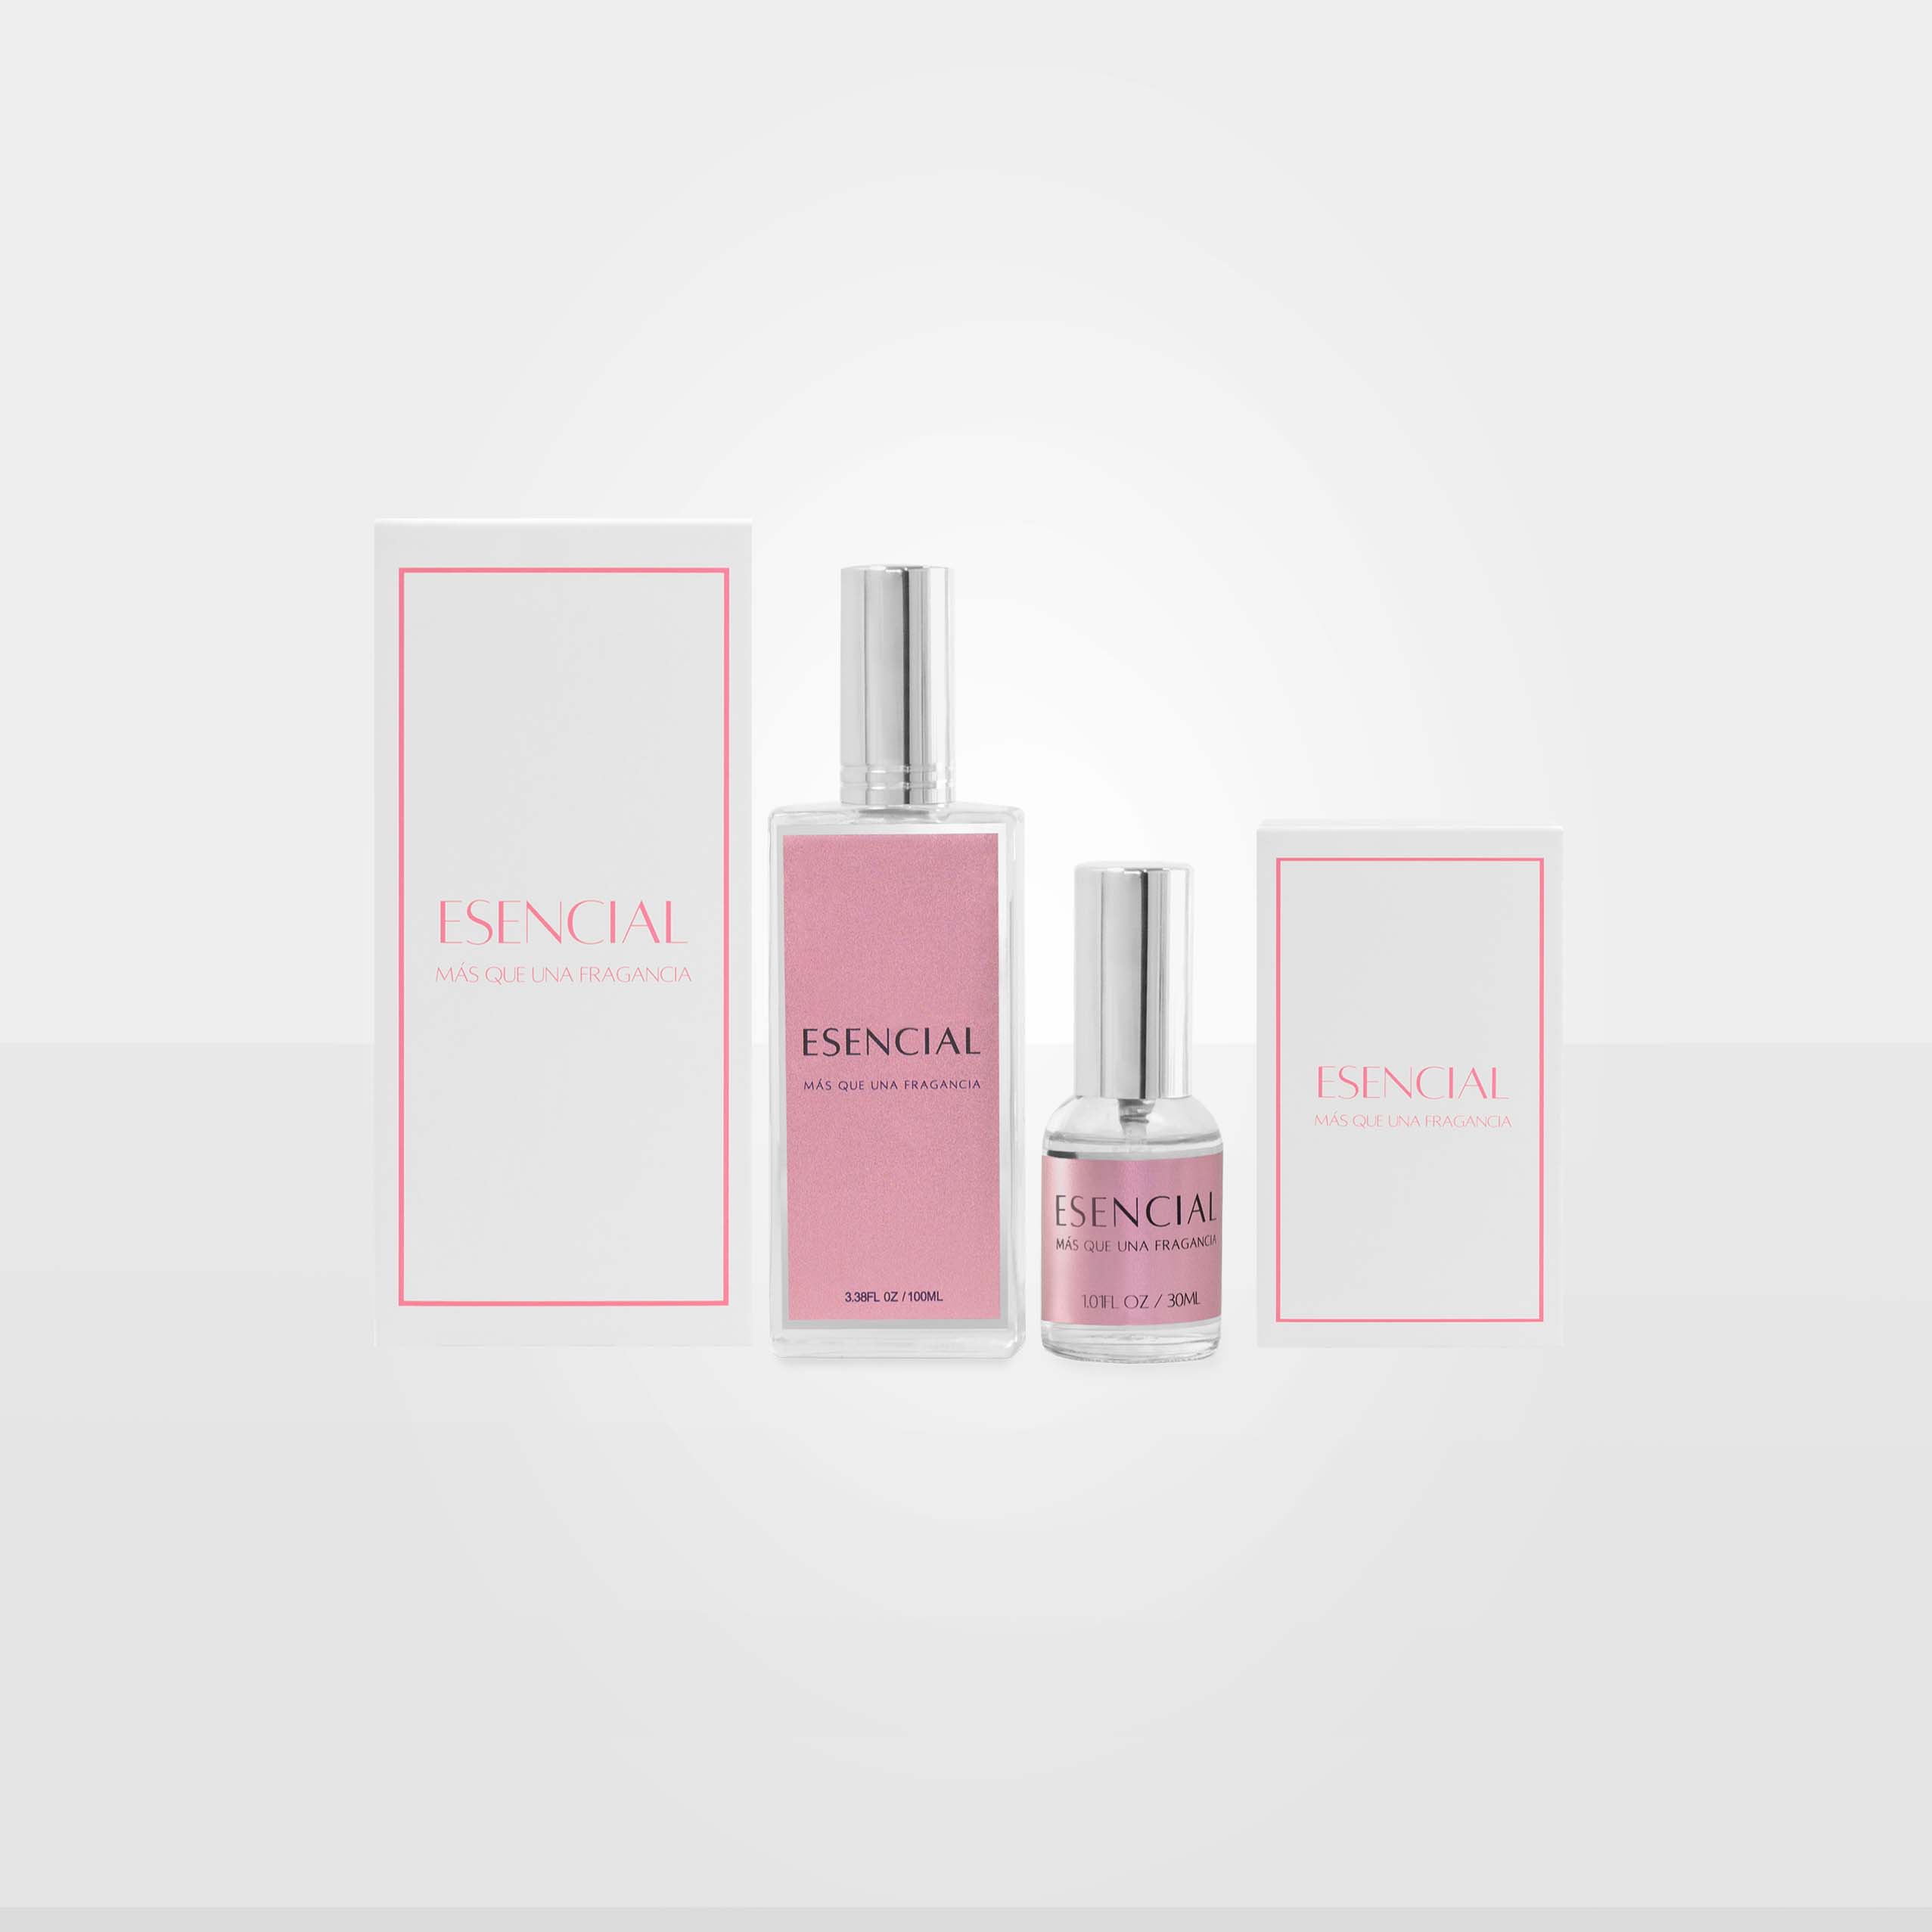 M164 Inspired by: L'Eau d'Issey Rose & Rose - Issey Miyake